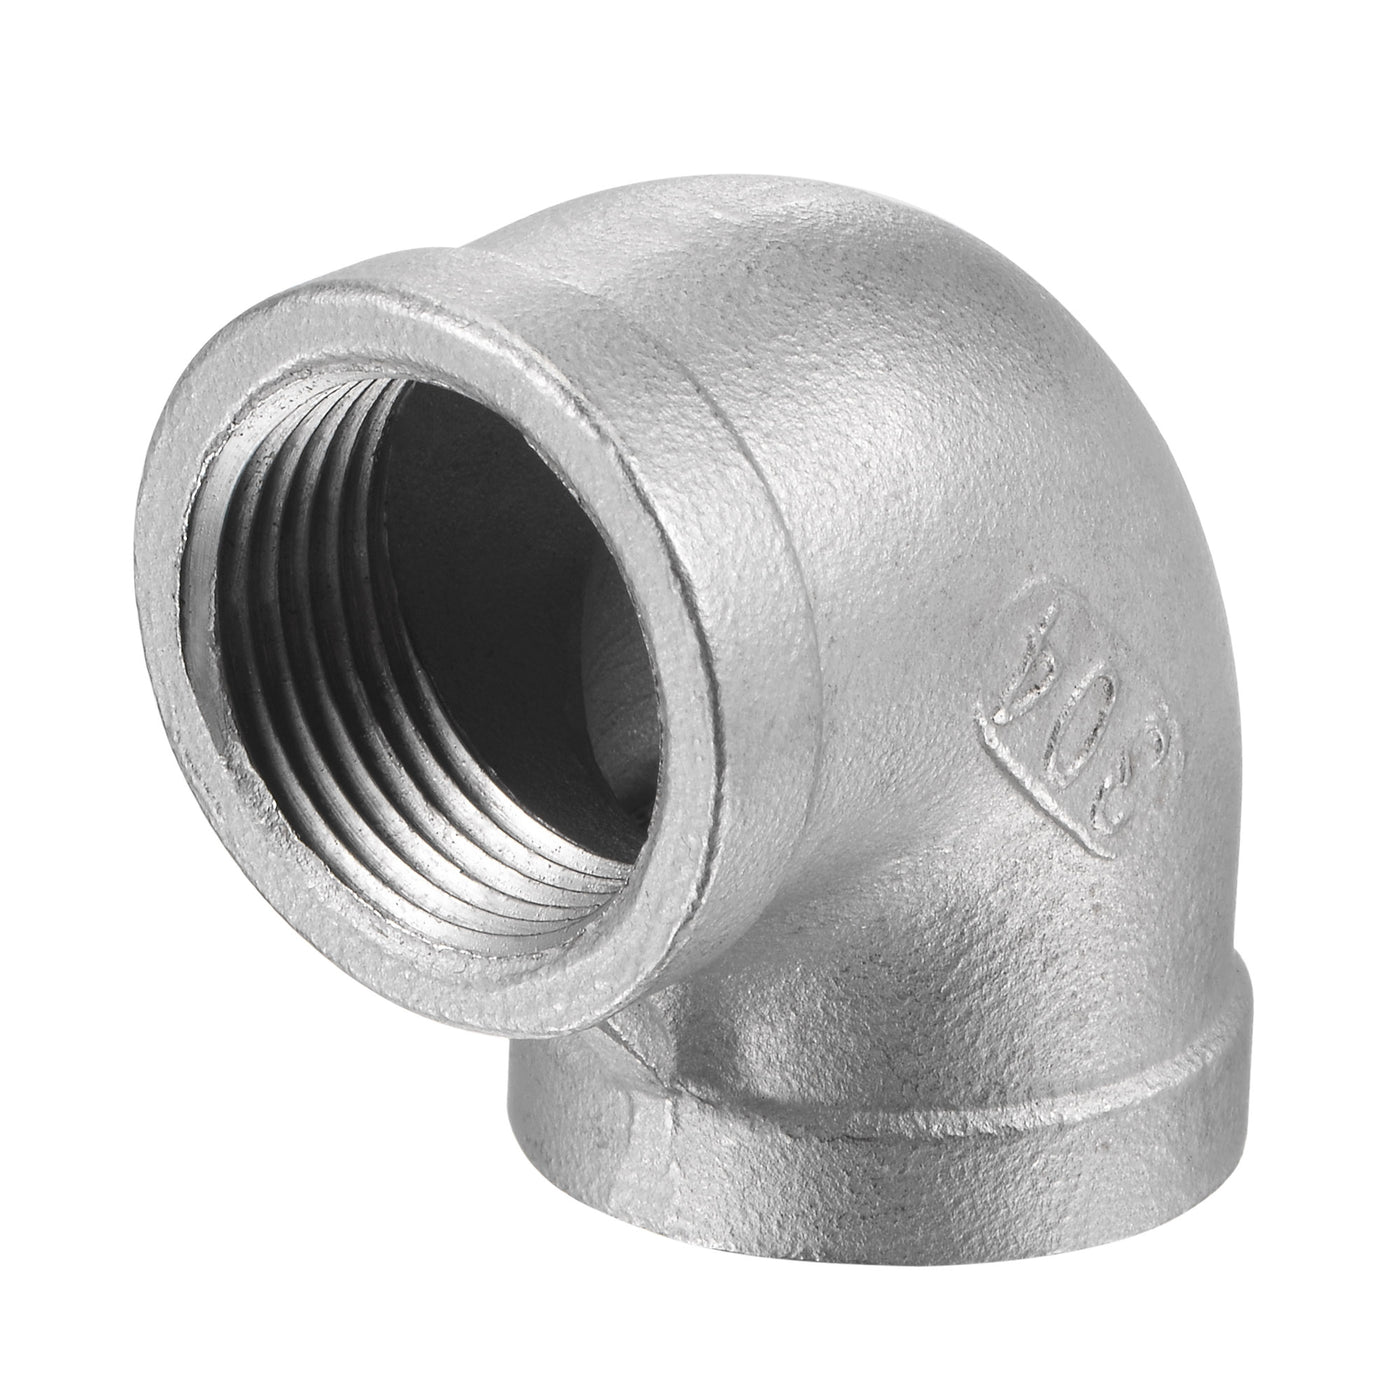 Uxcell Uxcell Pipe Fitting Elbow 3/4 NPT Female Thread Hose Connector Adapter, 304 Stainless Steel